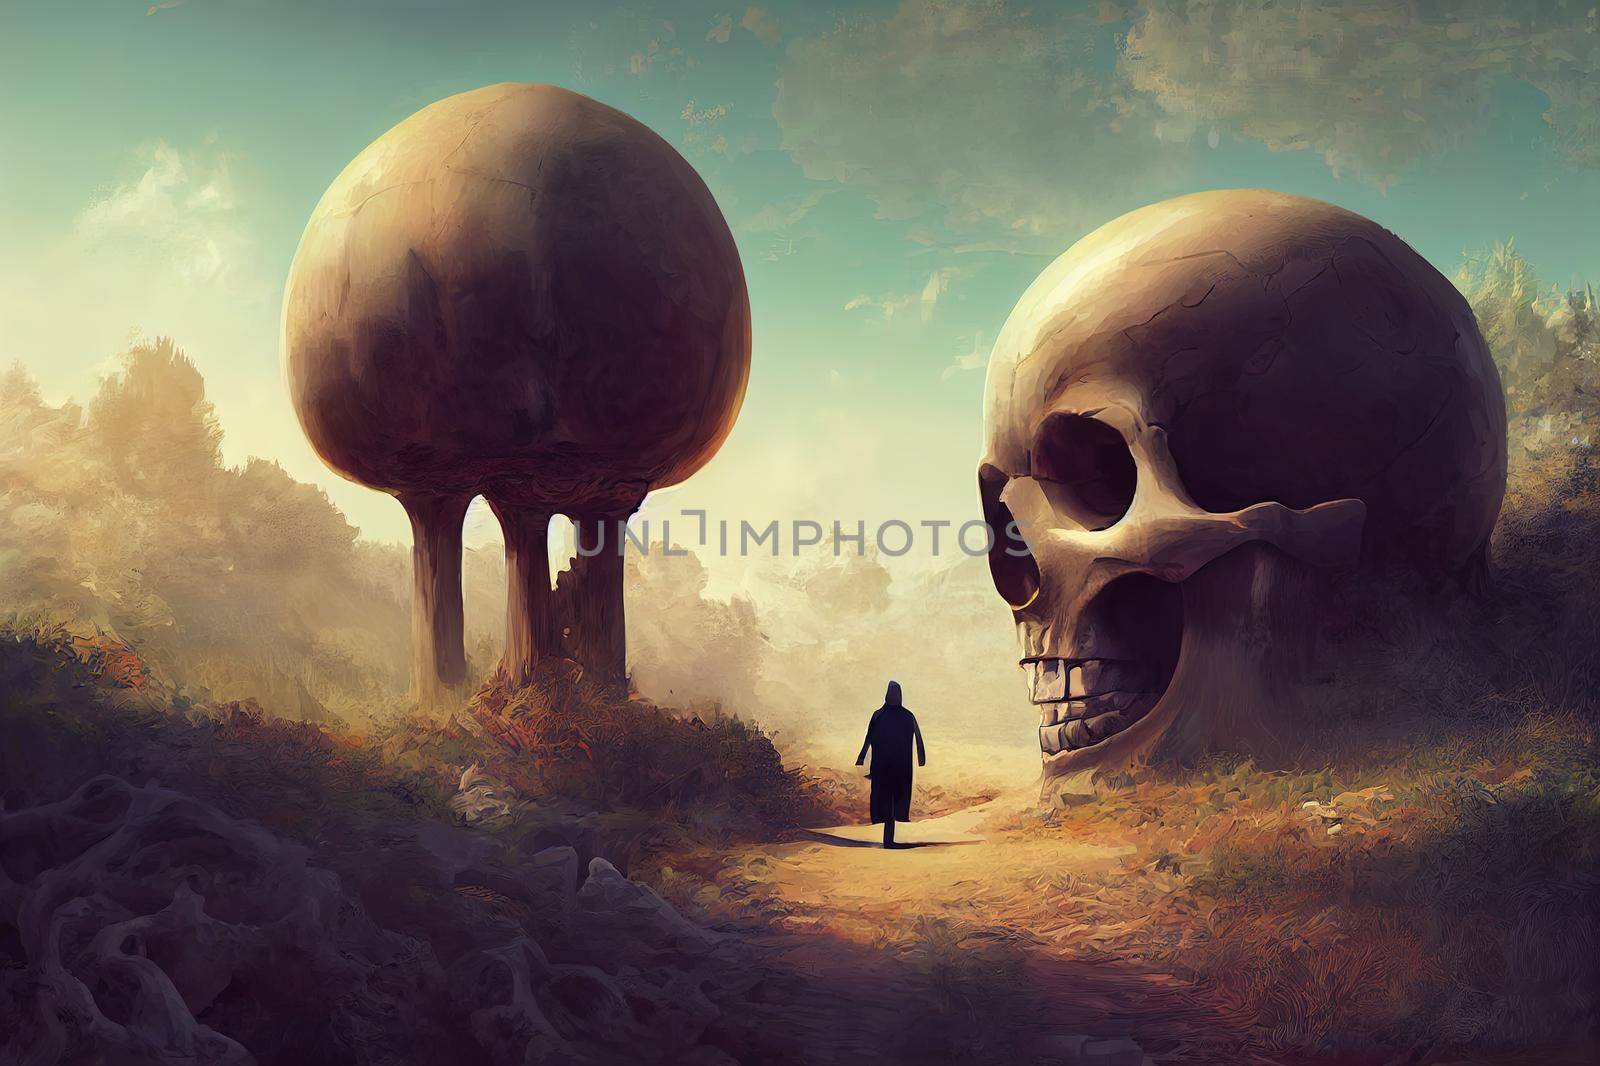 a man walks into a mysterious land with a giant skull in front of the entrance, digital art style, illustration painting